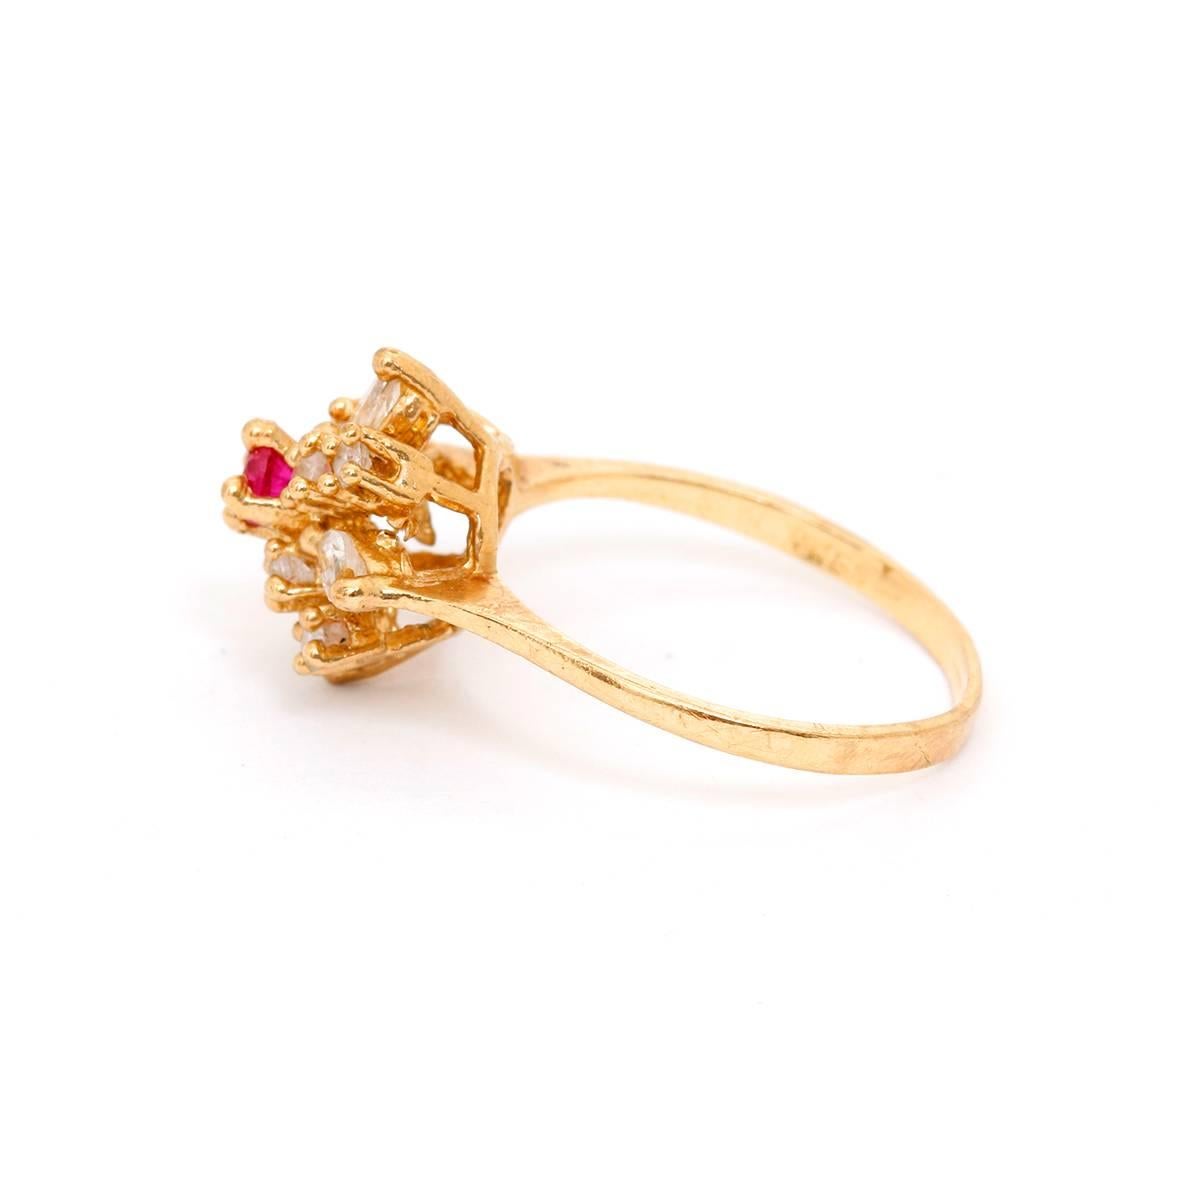 10K Yellow Gold Diamond Flower Ring Size 6.5 - . Flower diamond ring with a pink sapphire in middle. Total weight 2.3.